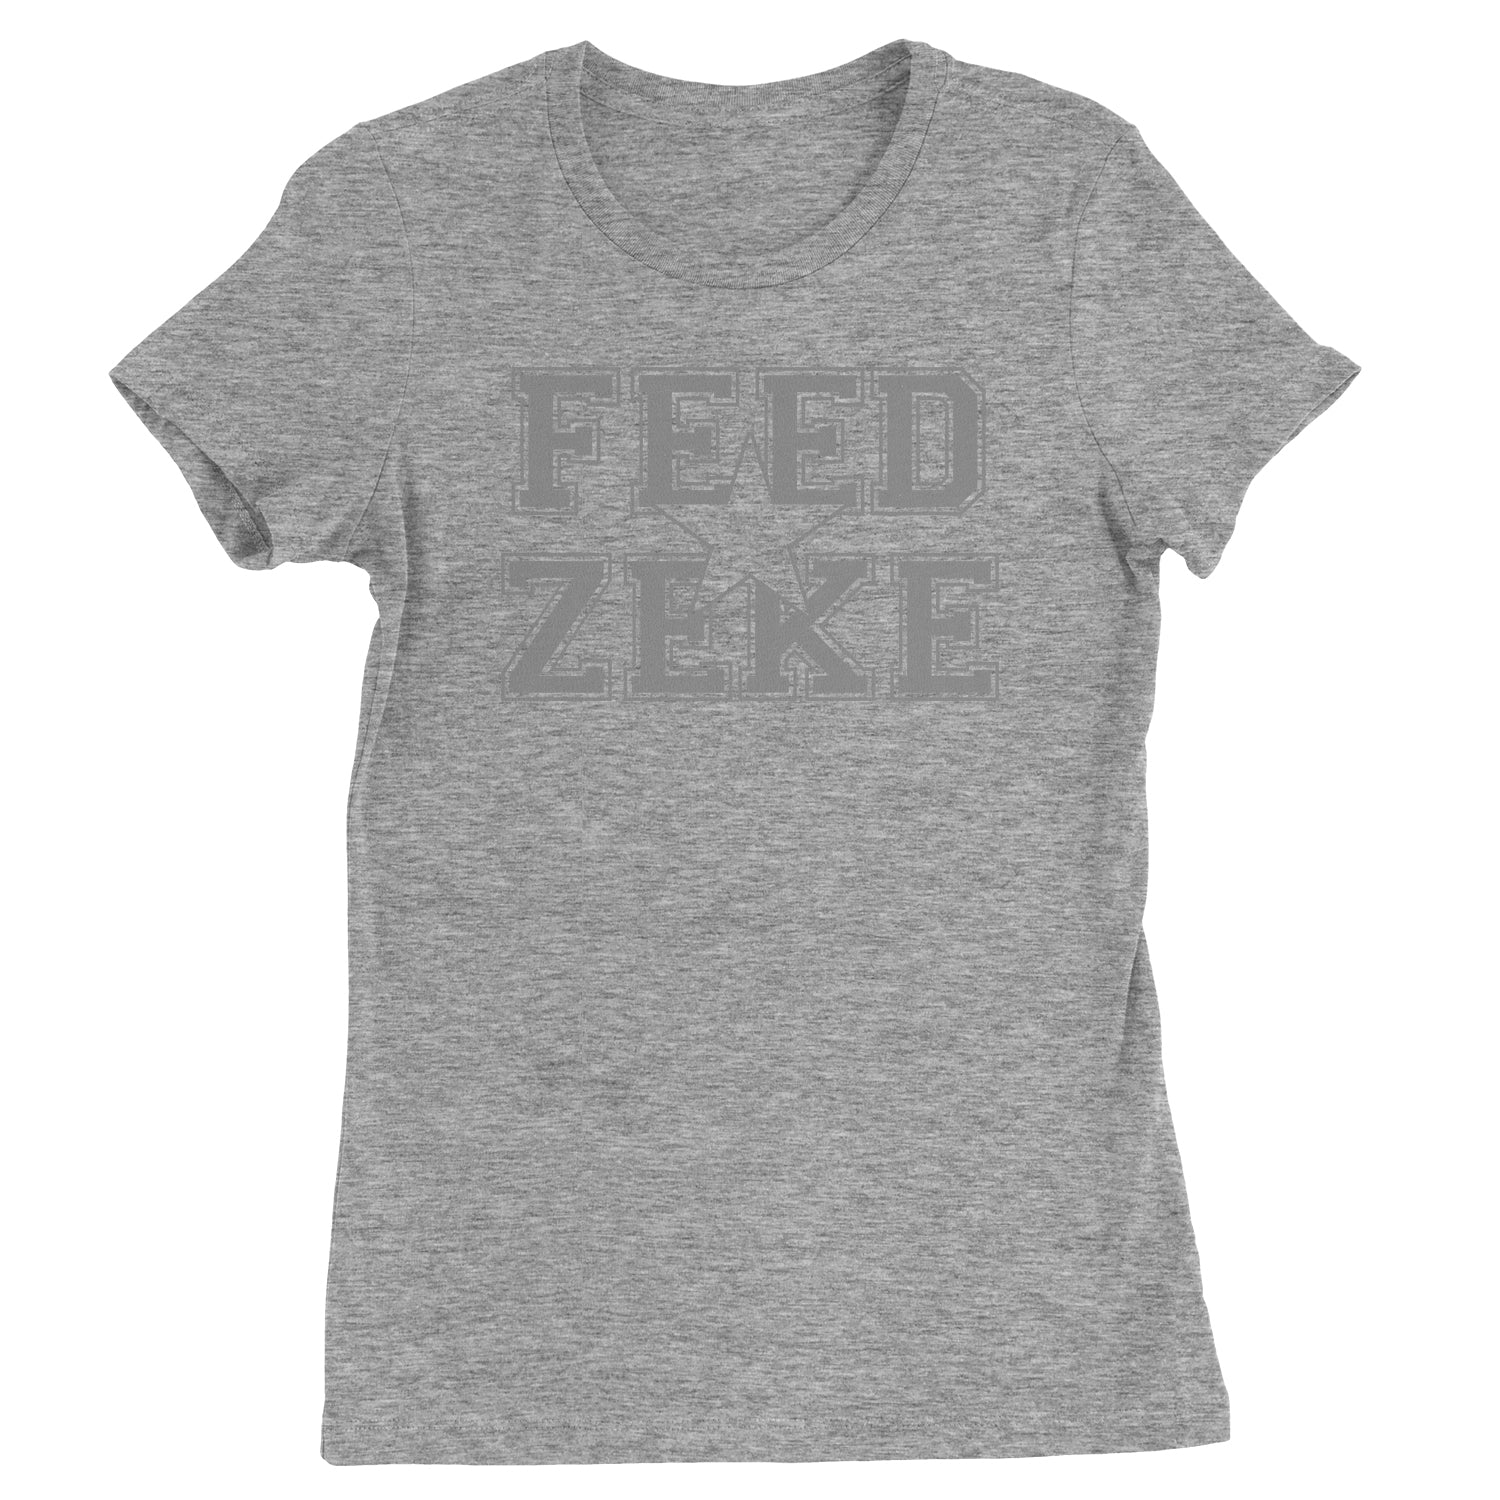 Feed Zeke Womens T-shirt #expressiontees by Expression Tees